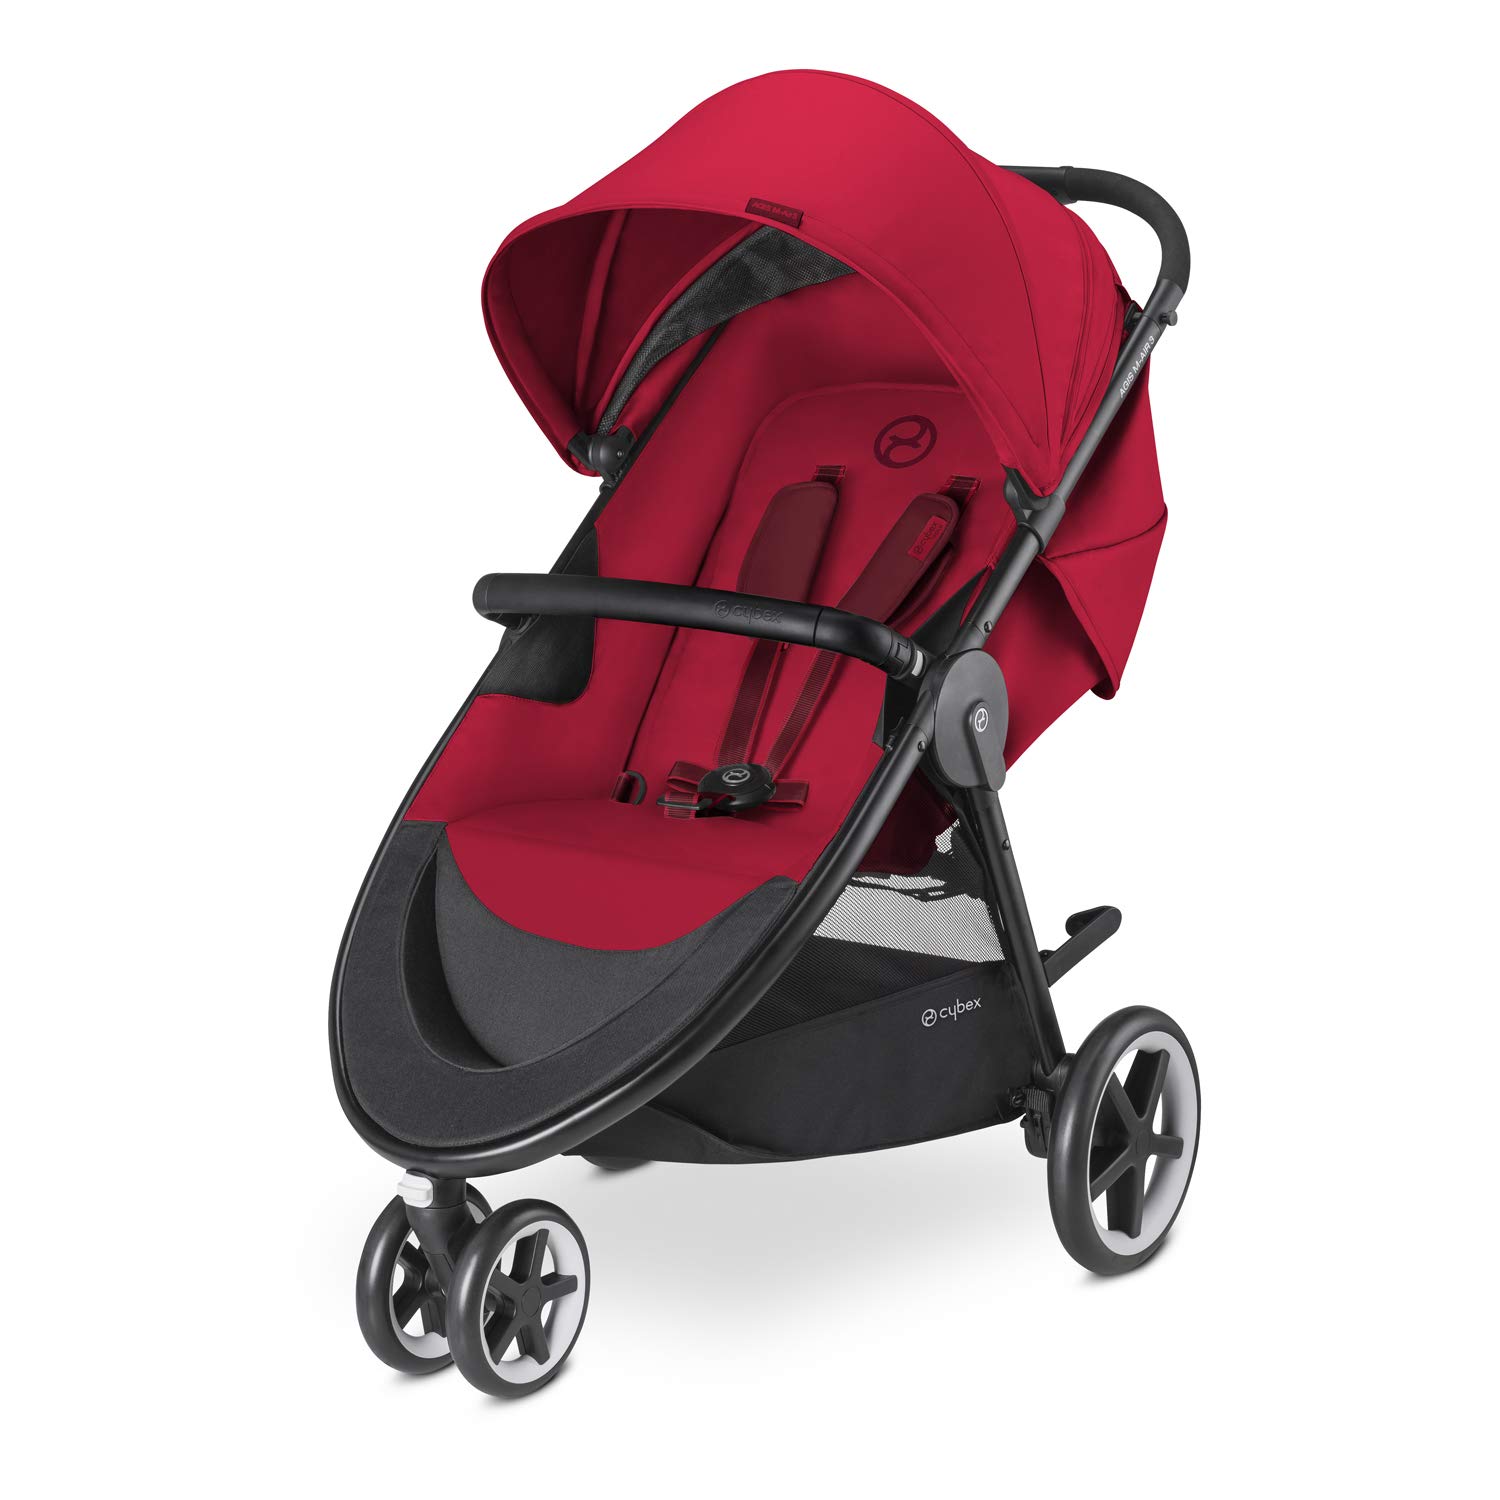 Cybex Gold Agis M Collection Air3 Pushchair, 2018